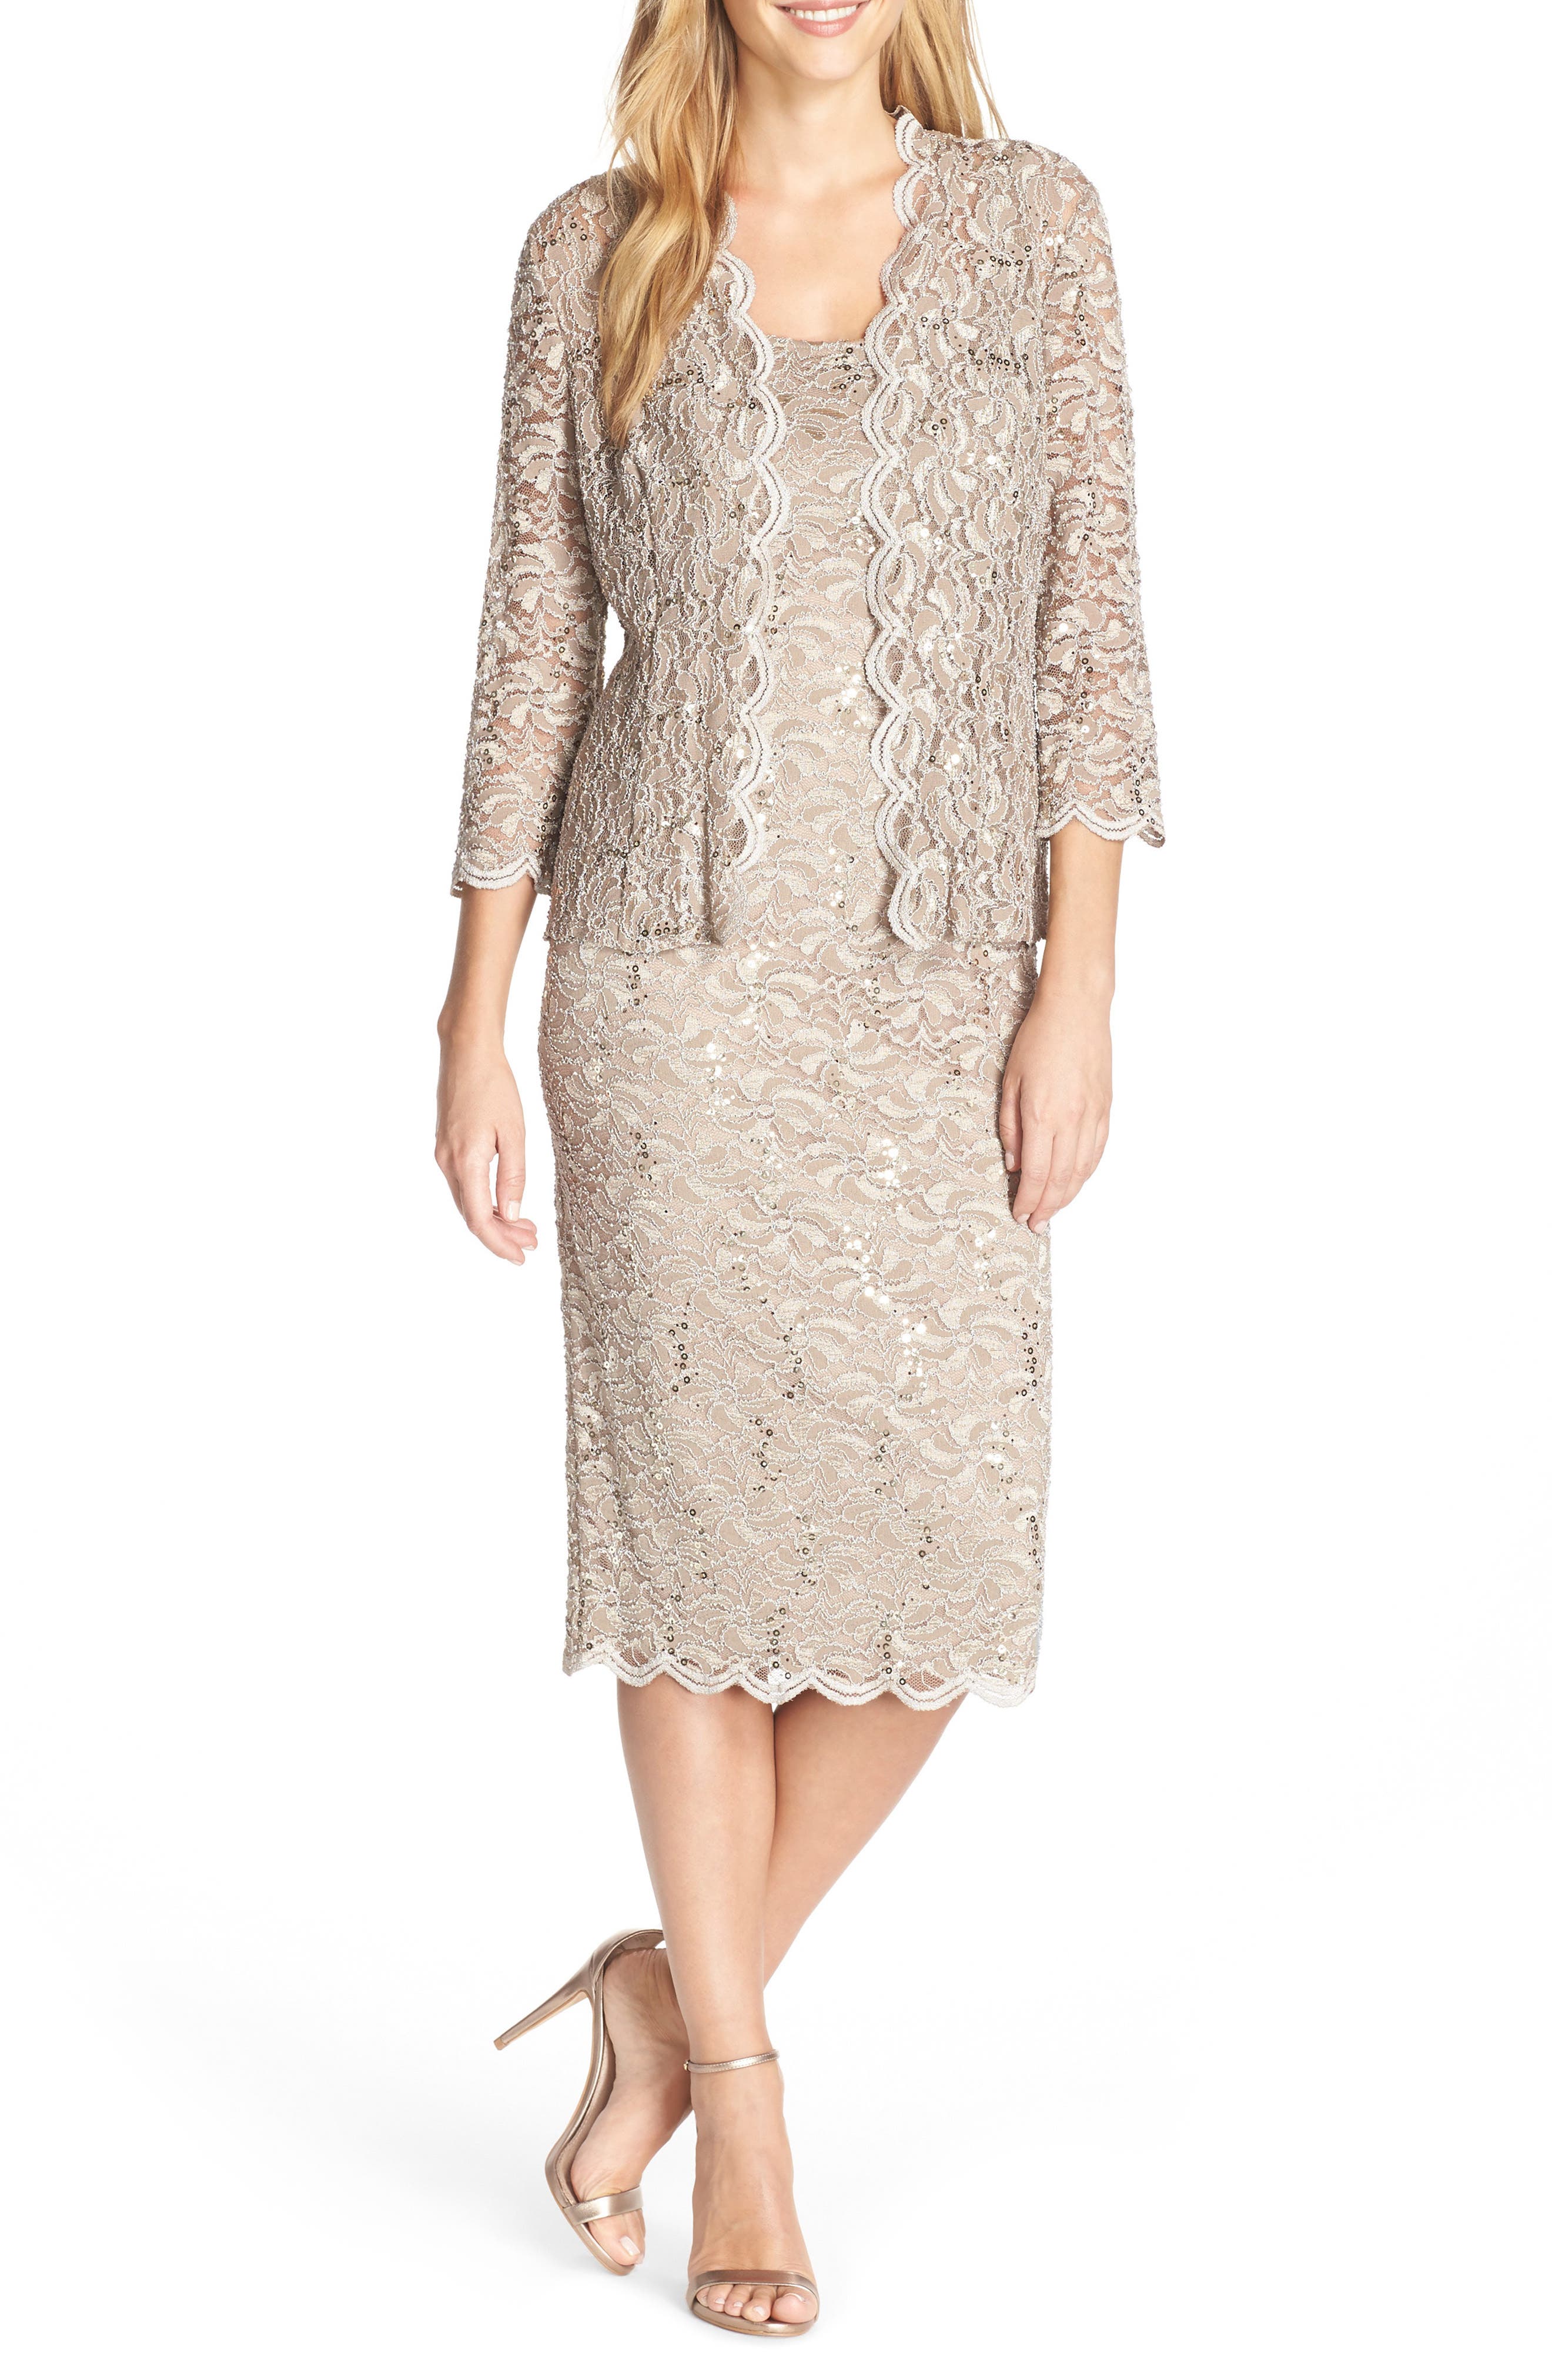 mother of the bride petite dresses nordstrom